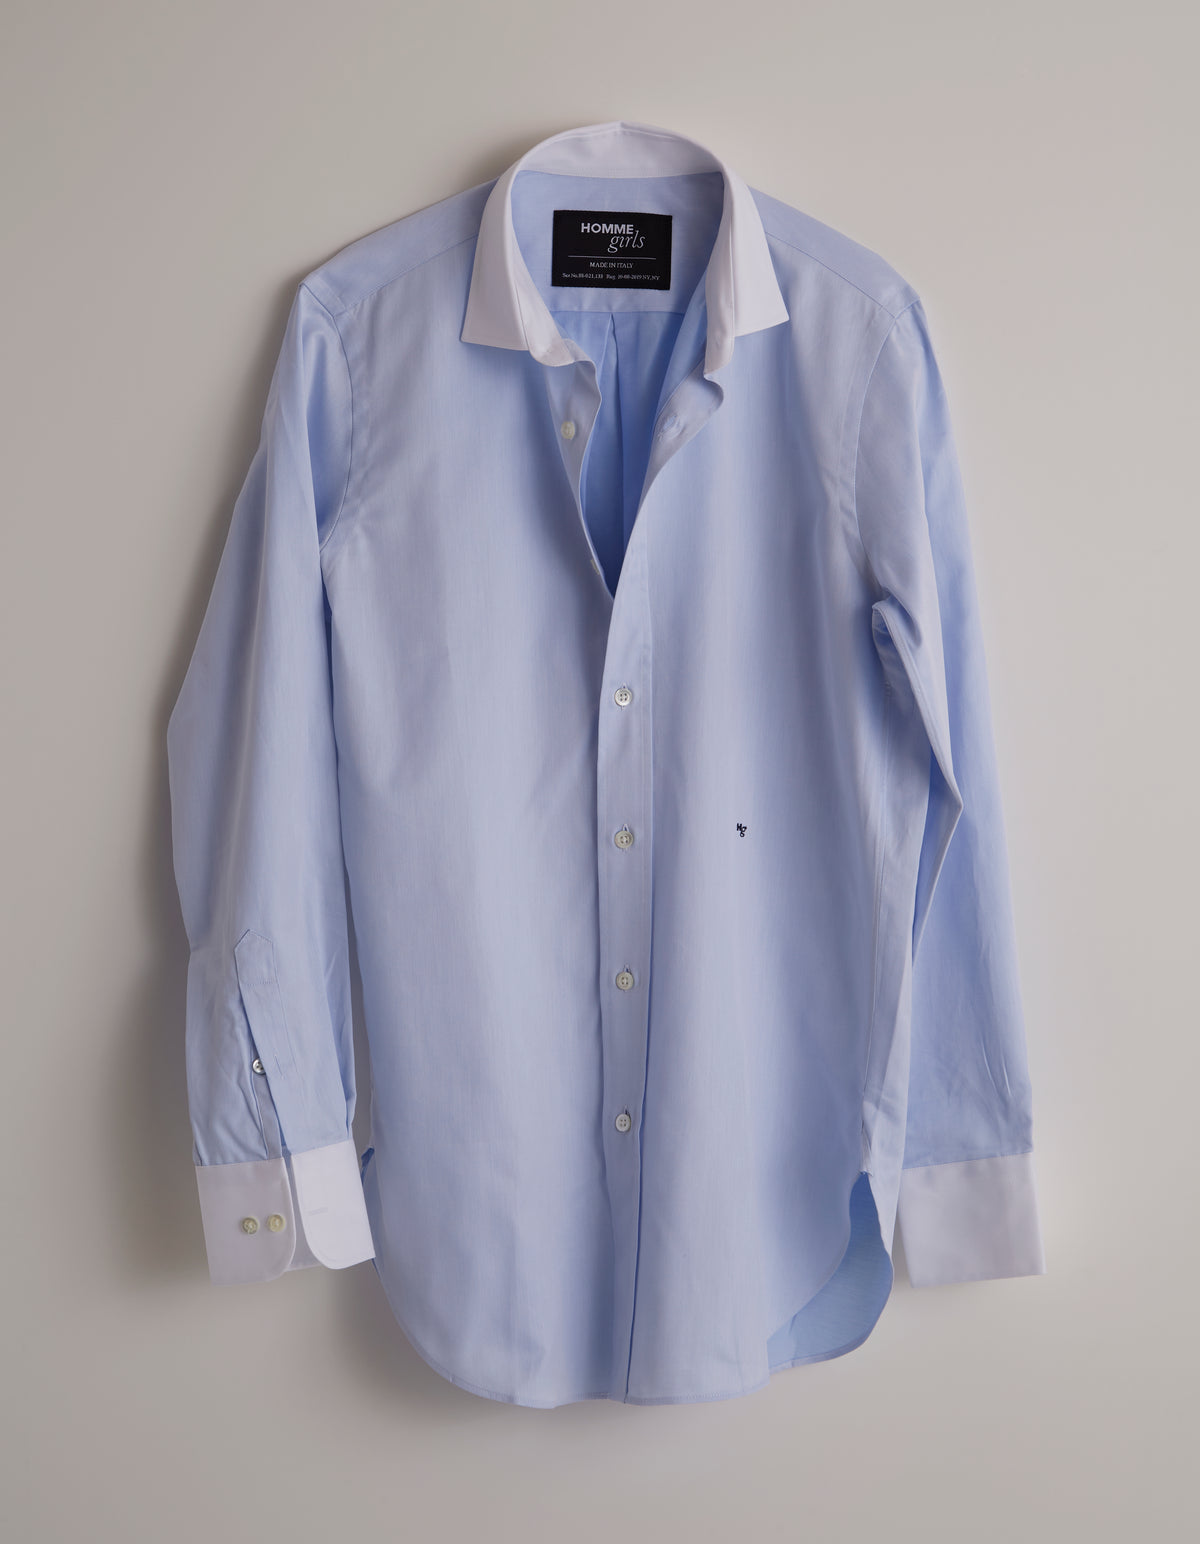 Chambray Blue Classic Contrast Collar Shirt